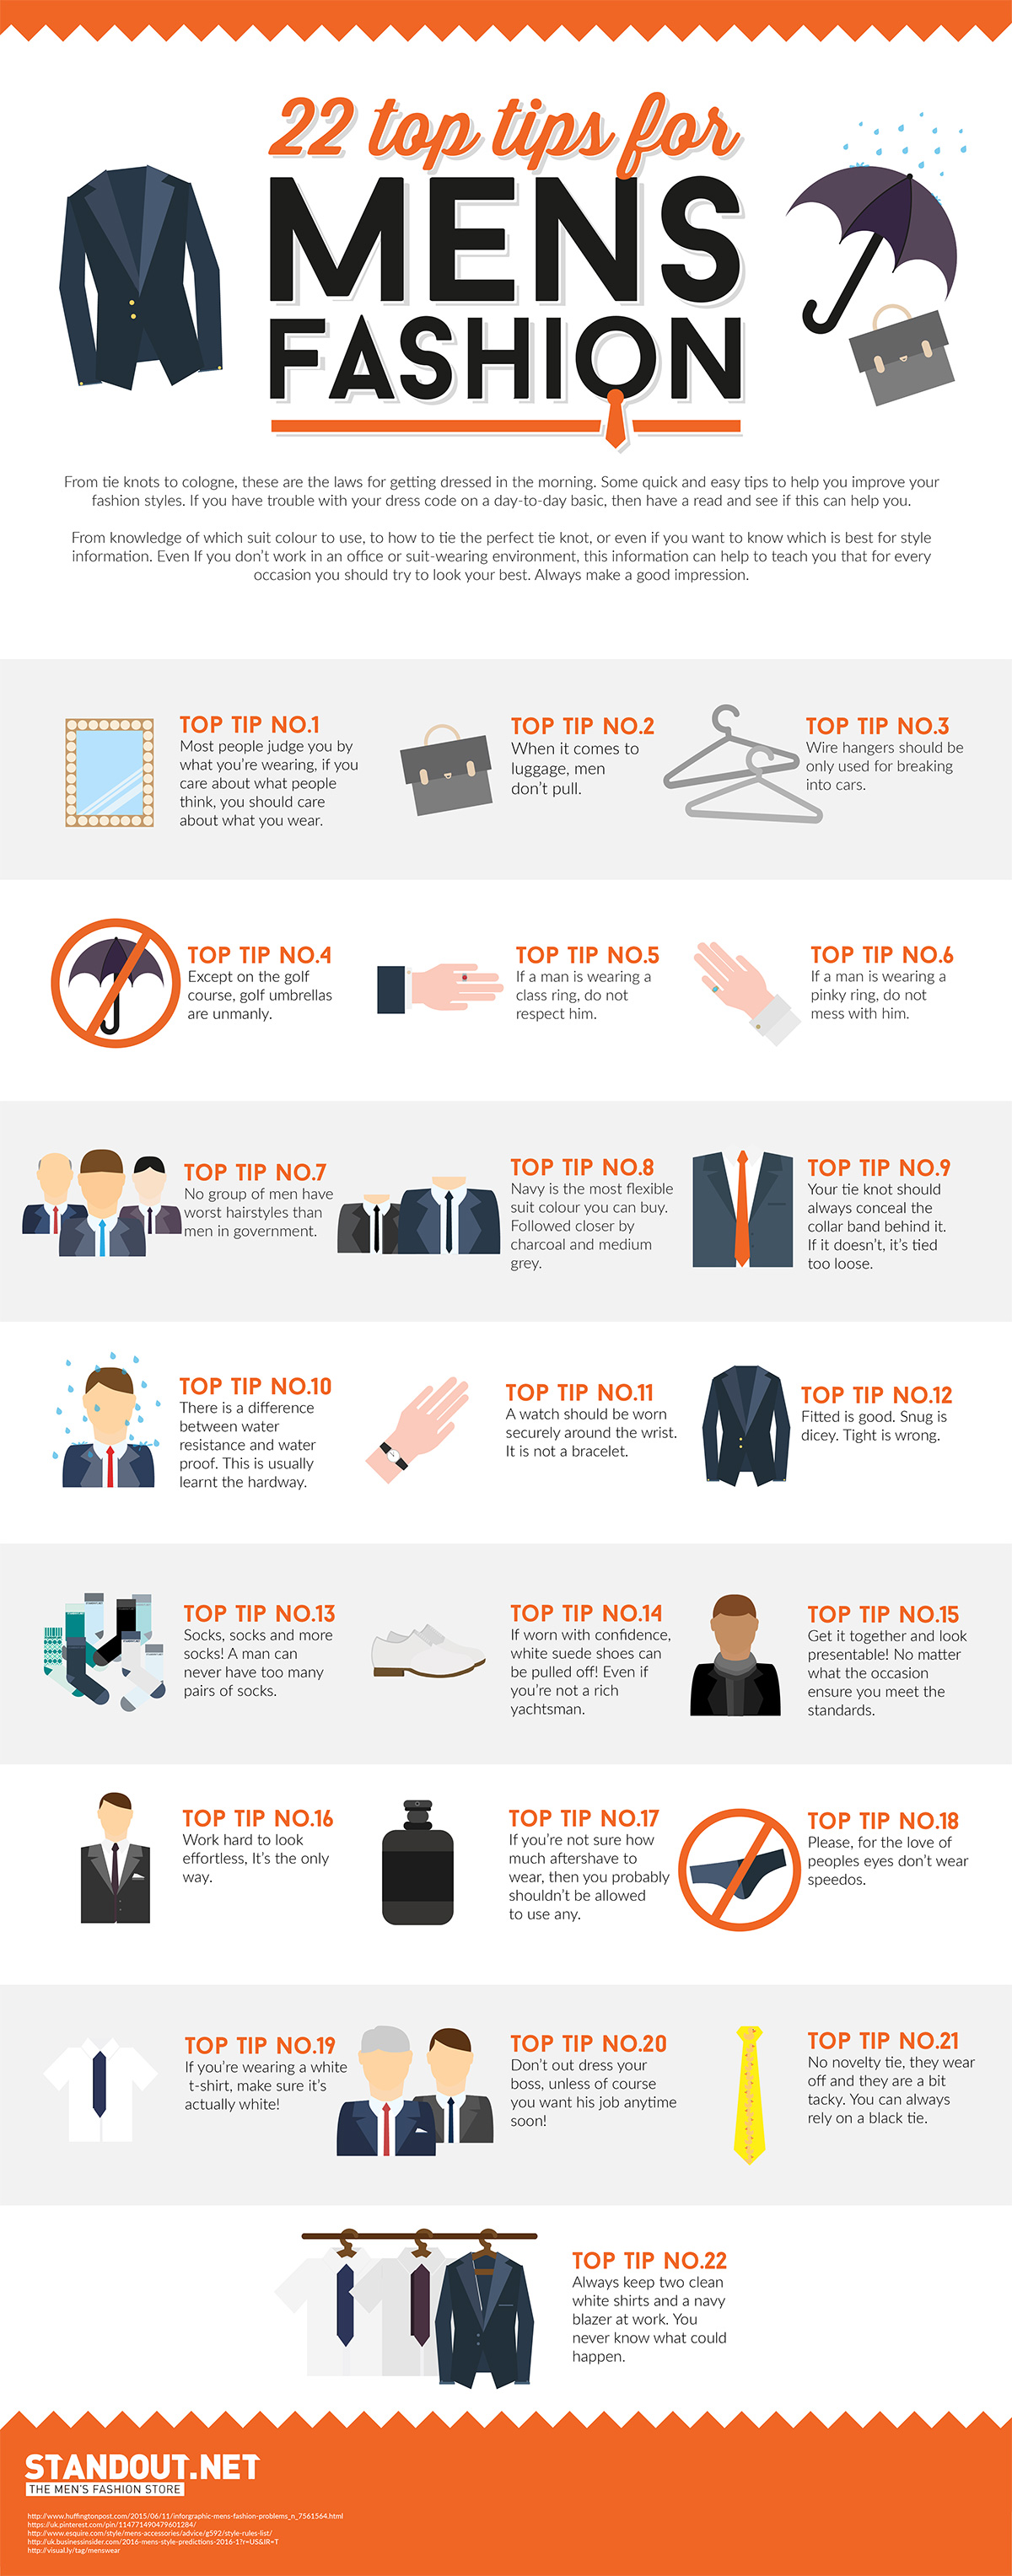 22 Top Tips For Mens Fashion [Infographic] — Every Thing For Dads